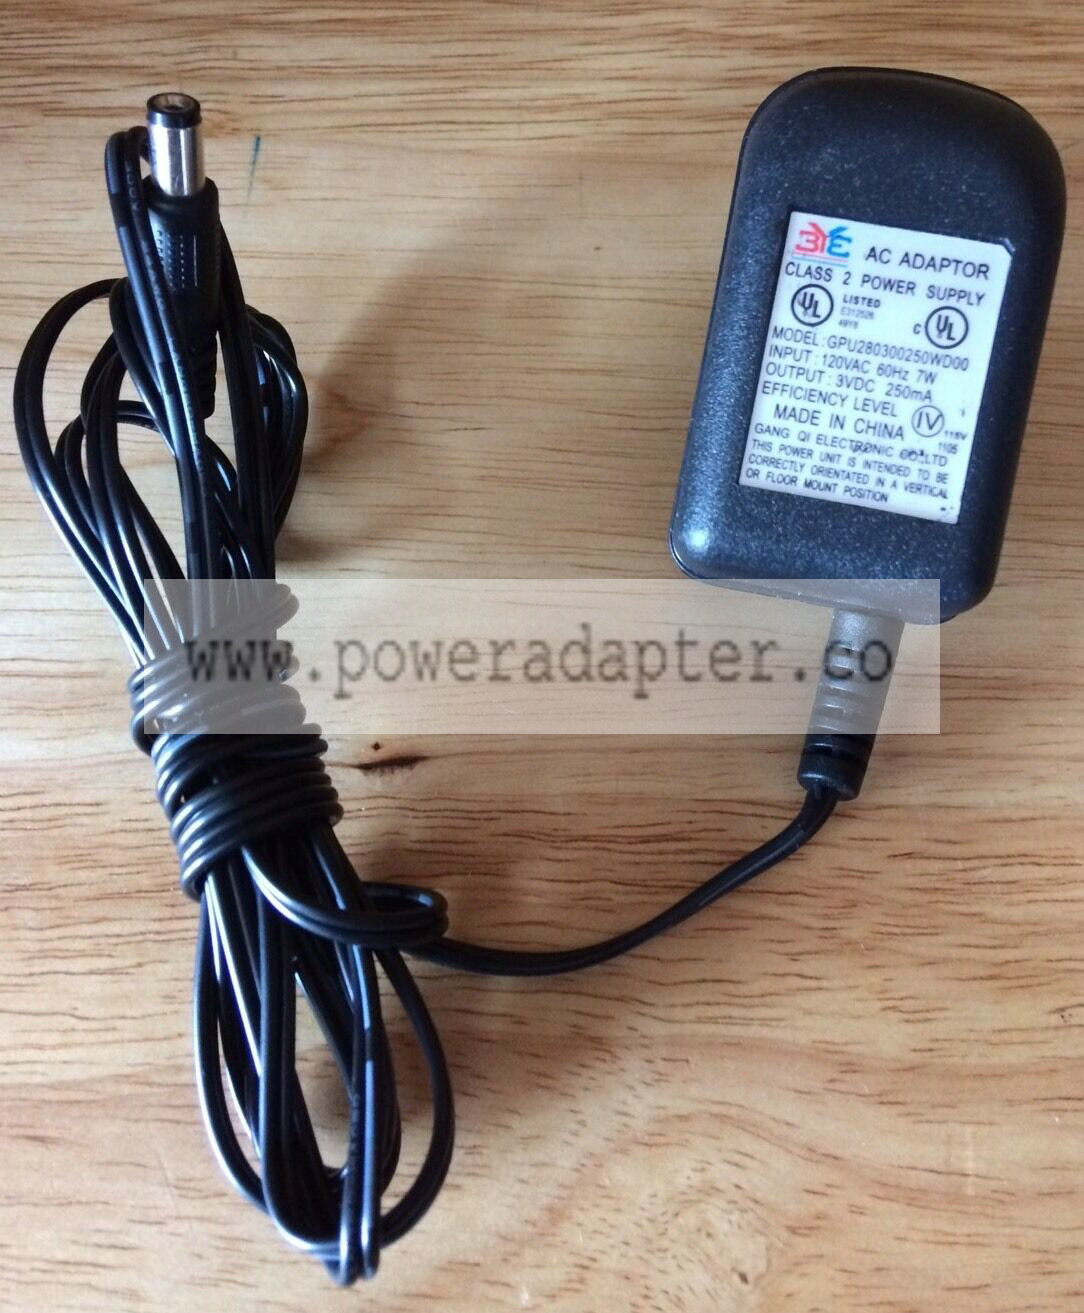 3YE GPU280300250WD00 AC Power Adapter 3VDC~250mA~7W~Tested Brand: 3YE Type: AC Adapter Output Voltage: 3V, 250mA, 7W - Click Image to Close